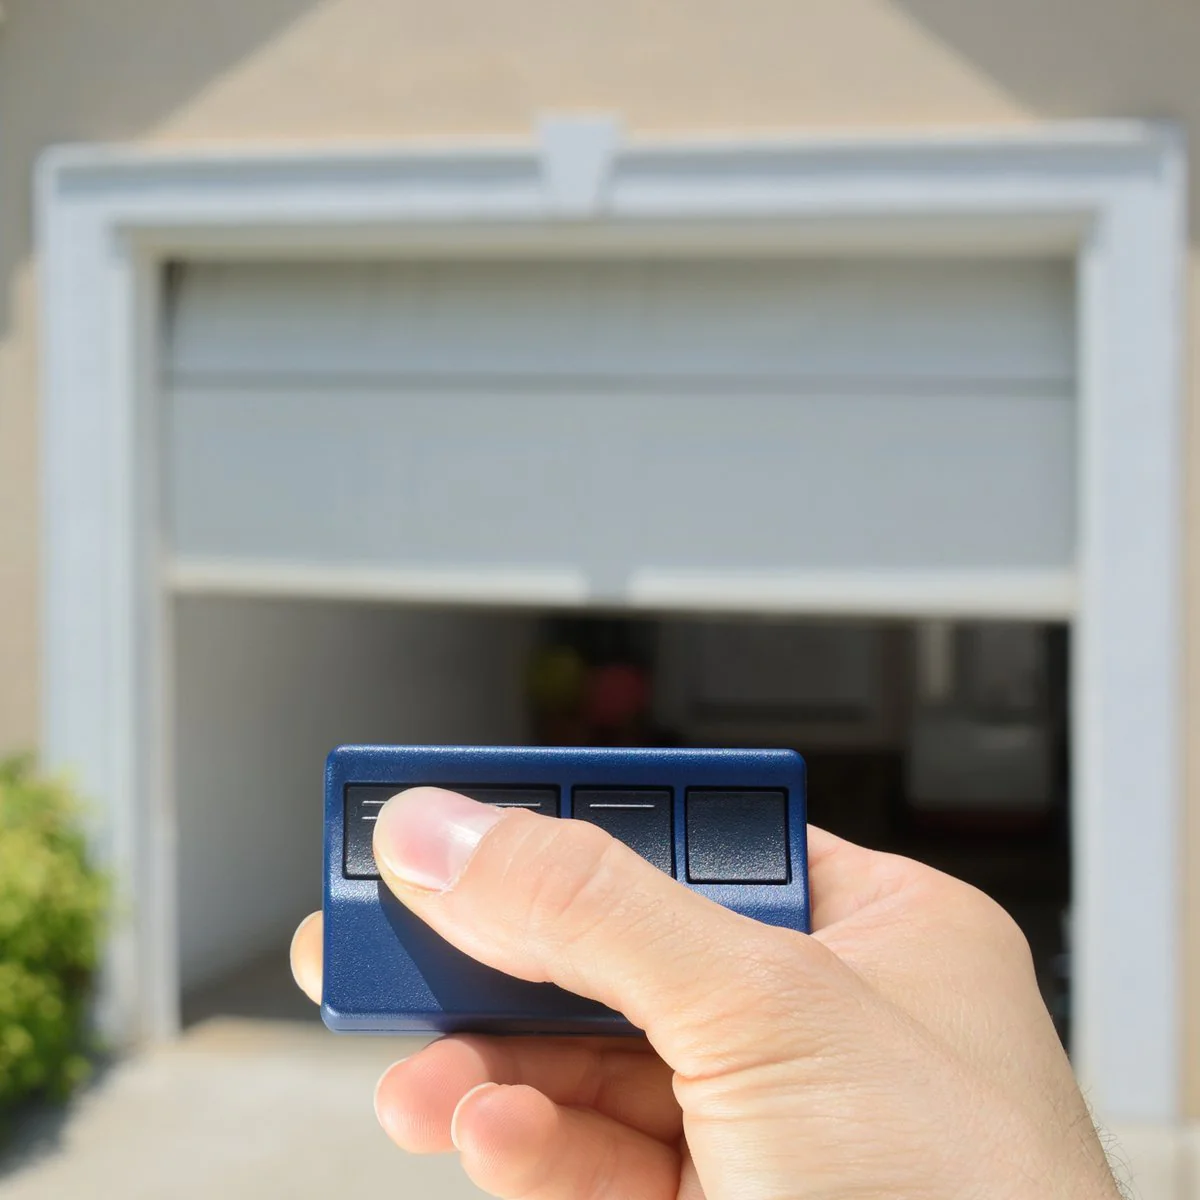 Why Is Your Garage Door Not Closing With the Remote? Troubleshooting Guide